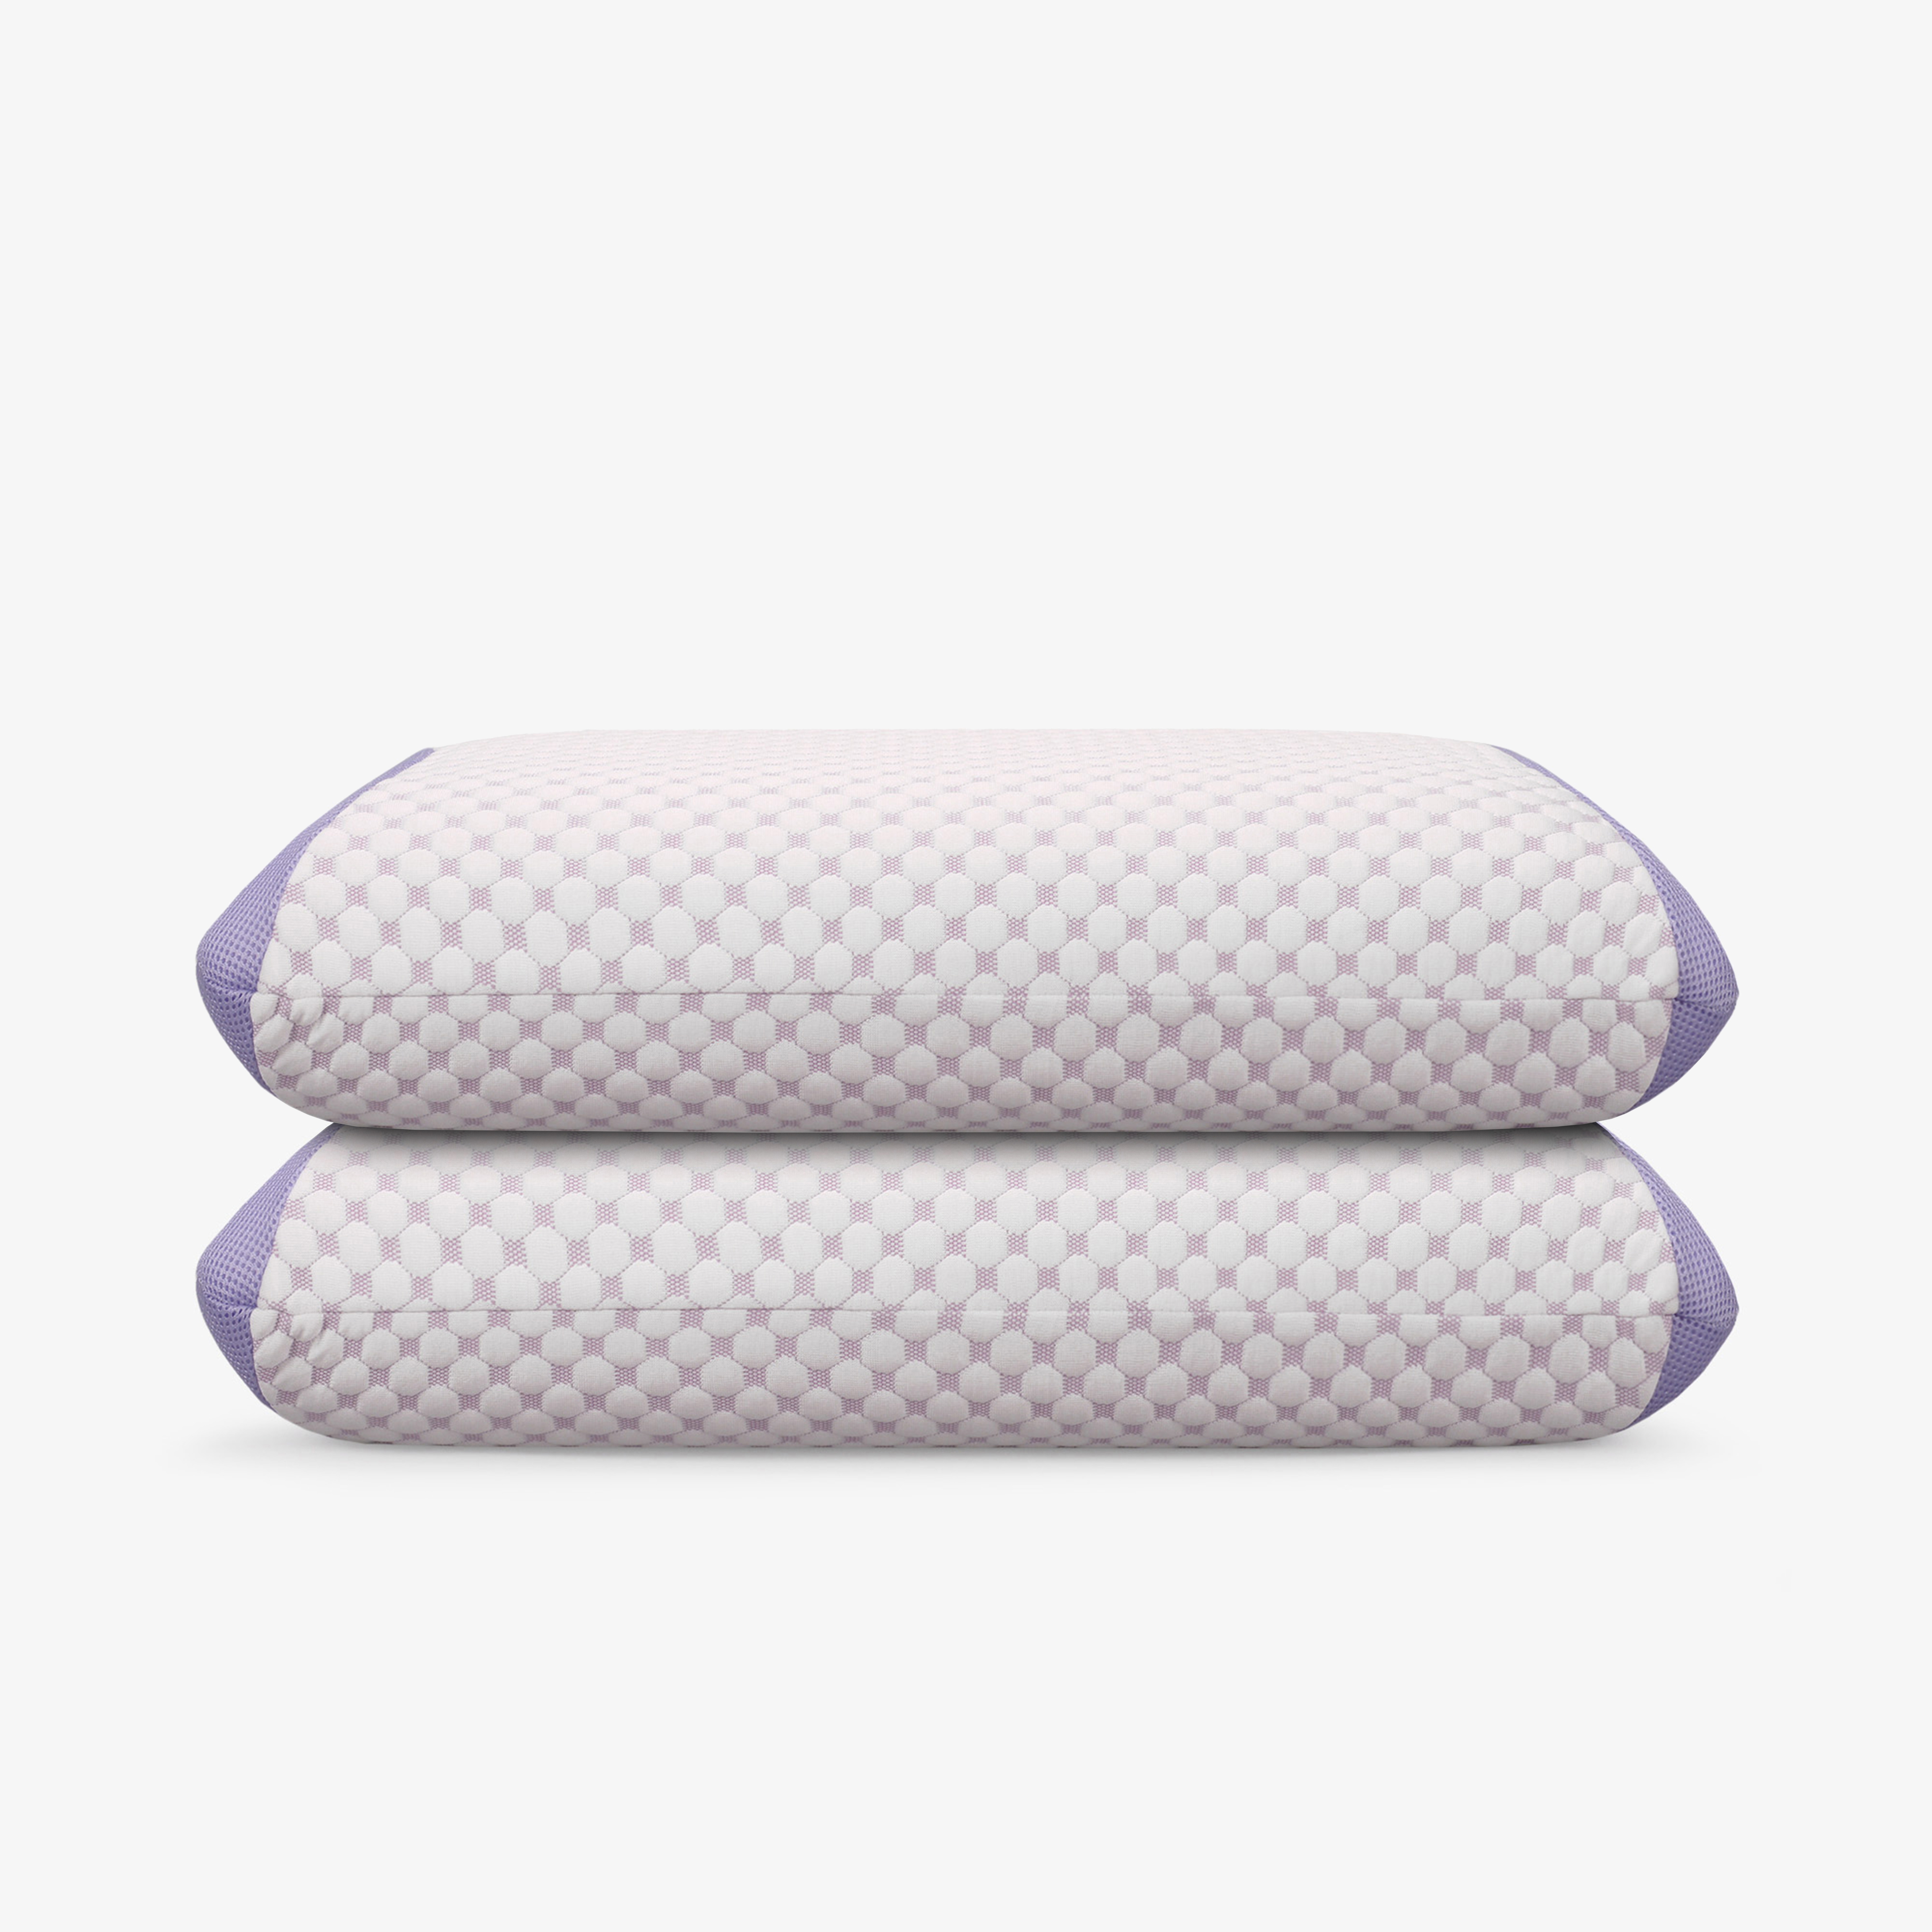 the ploom pillow